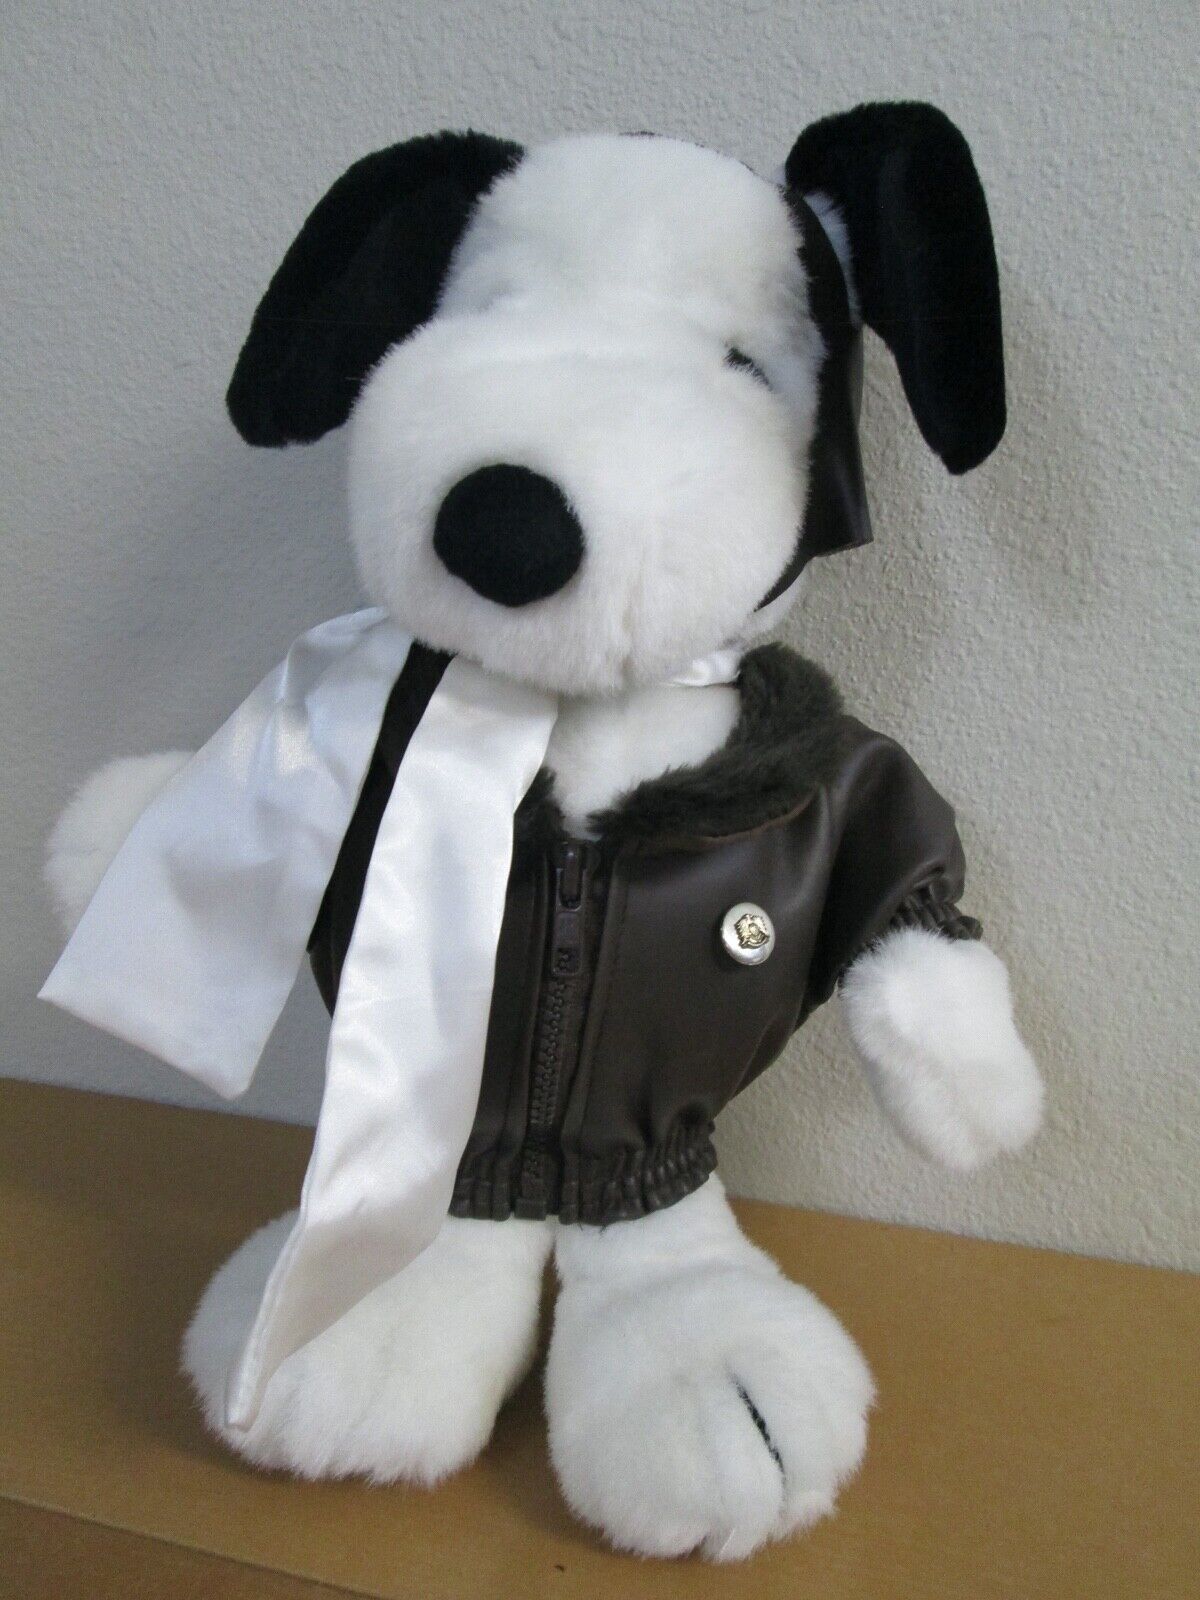 Vintage Snoopy Plush Stuffed Toy 1992 Peanuts Pilot Flying Ace 13